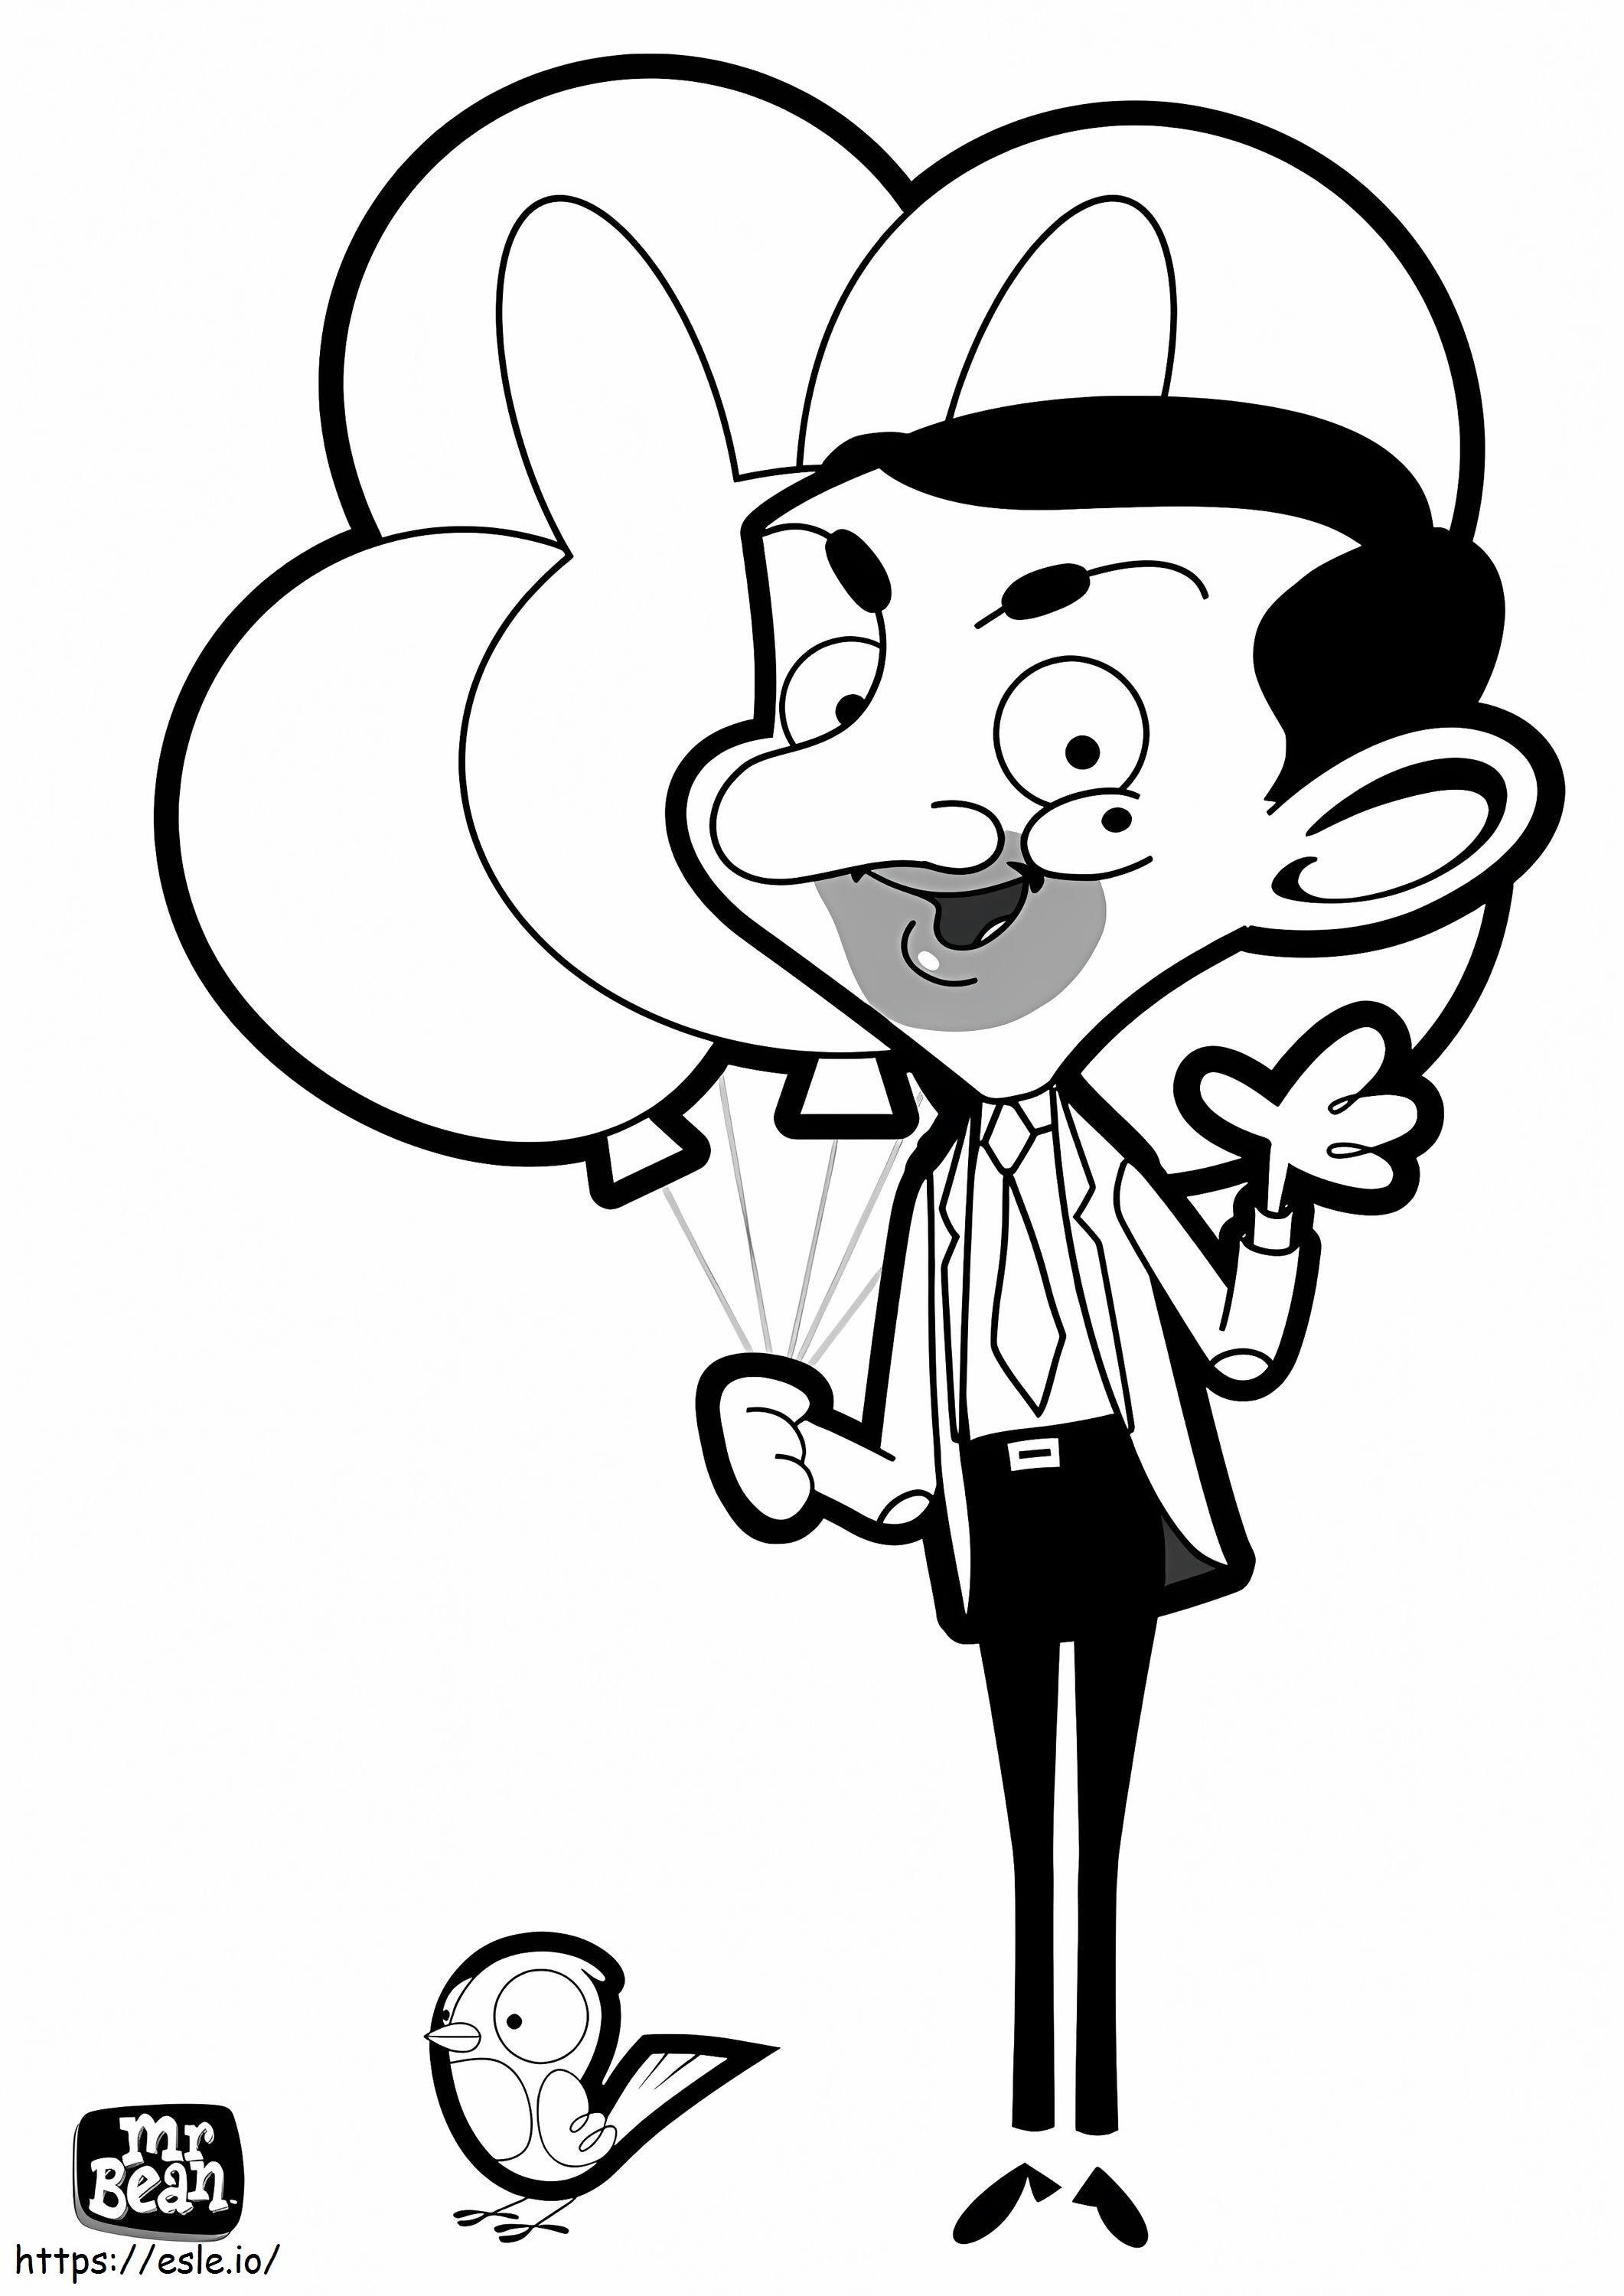 1531708586 Mr Bean Saying Hello A4 coloring page